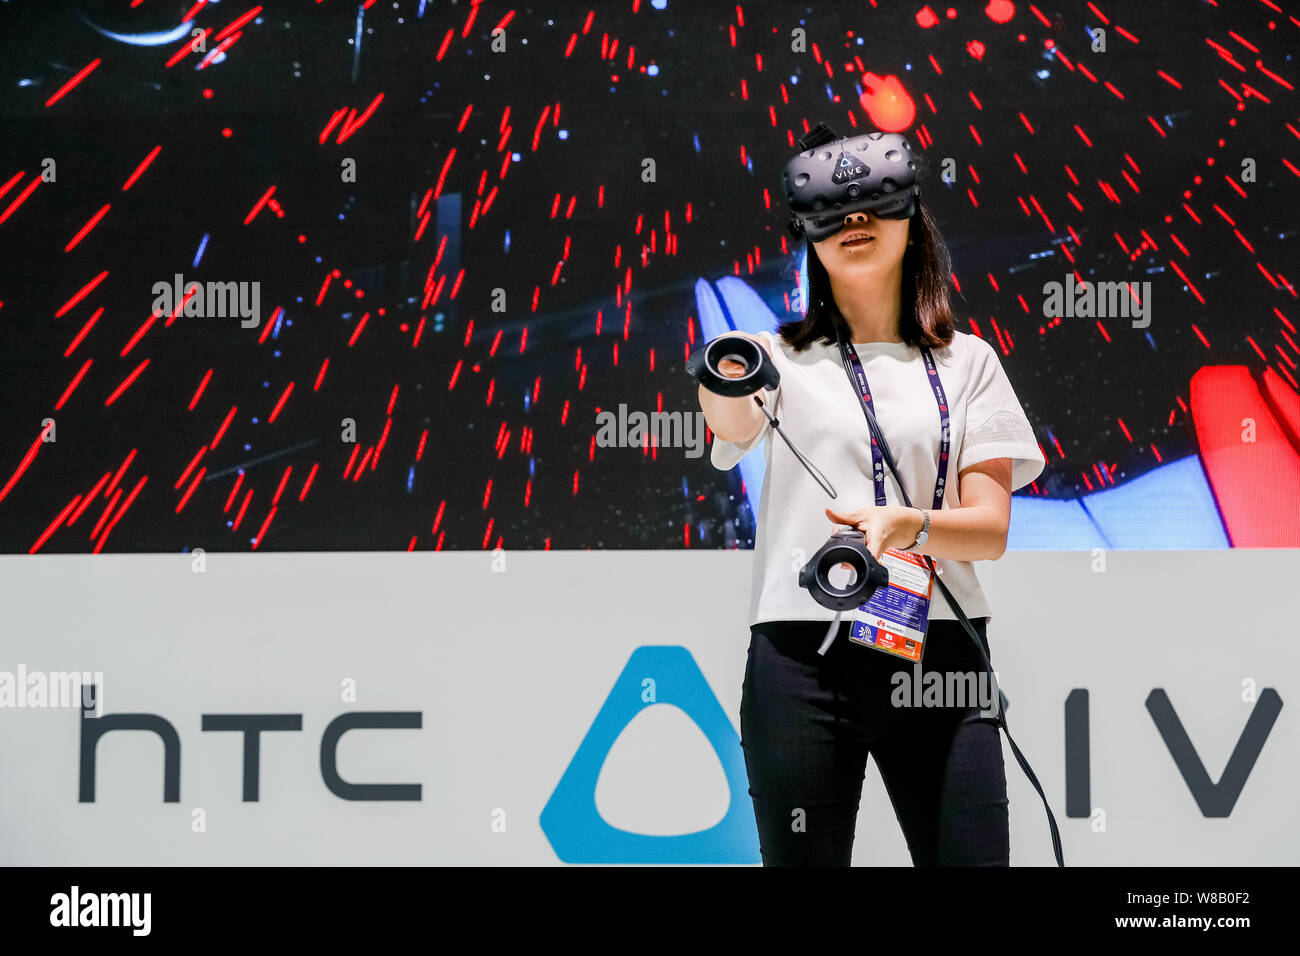 A visitor tries out a HTC VR (Virtual Reality) device during the 2016 Mobile World Congress (MWC) in Shanghai, China, 29 June 2016.   The Mobile World Stock Photo